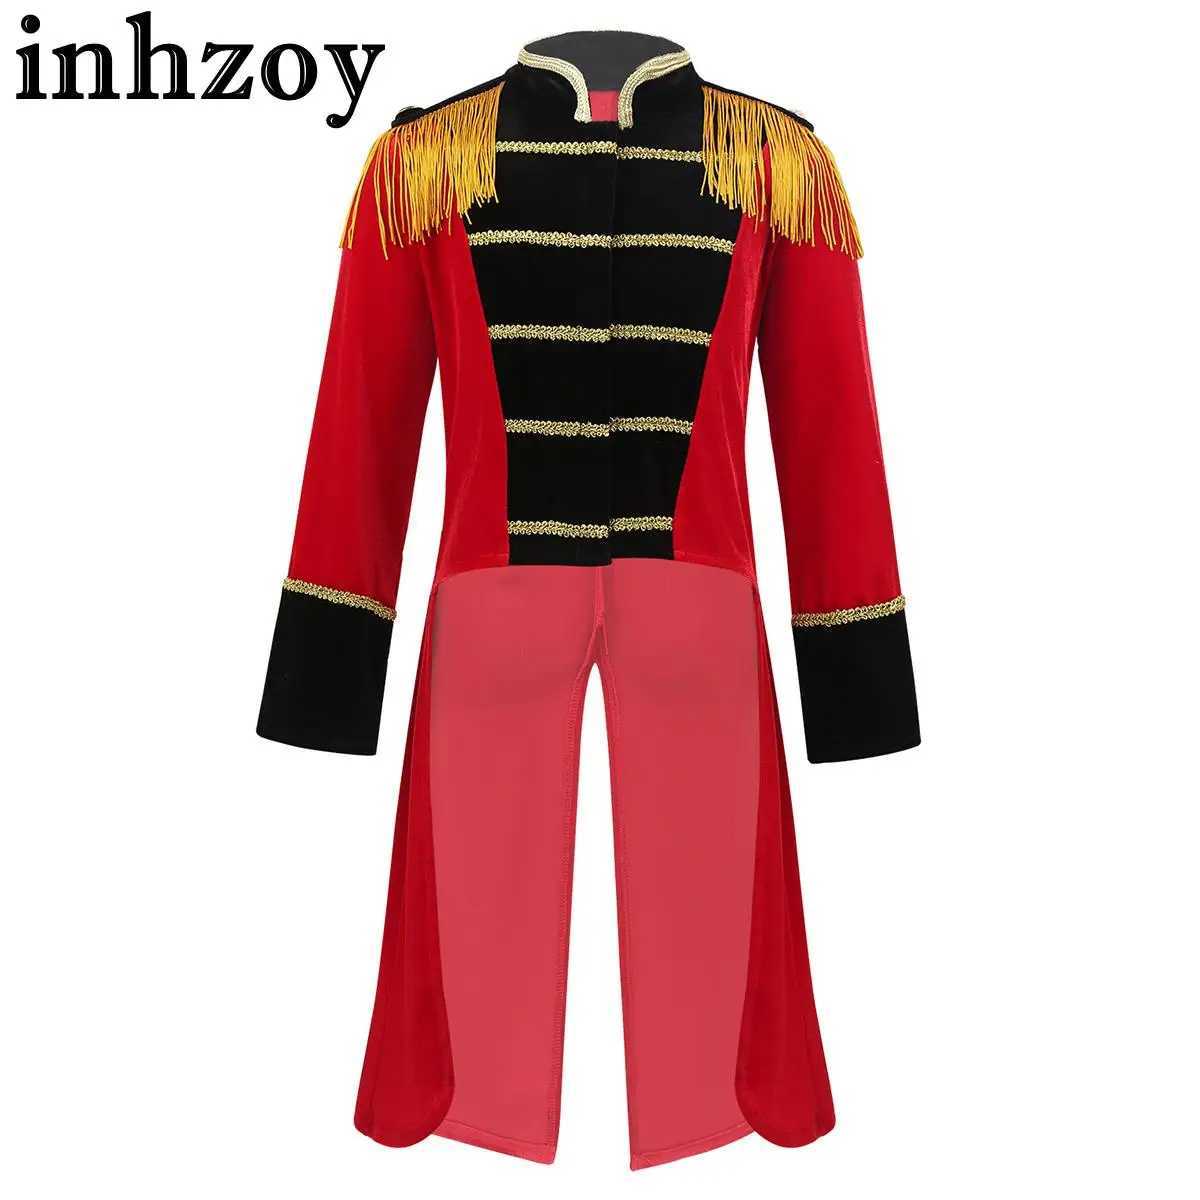 Cosplay Kids Boys Circus Ringmaster Costume Halloween Outfit da festa cosplay Fringes Gold Tropte